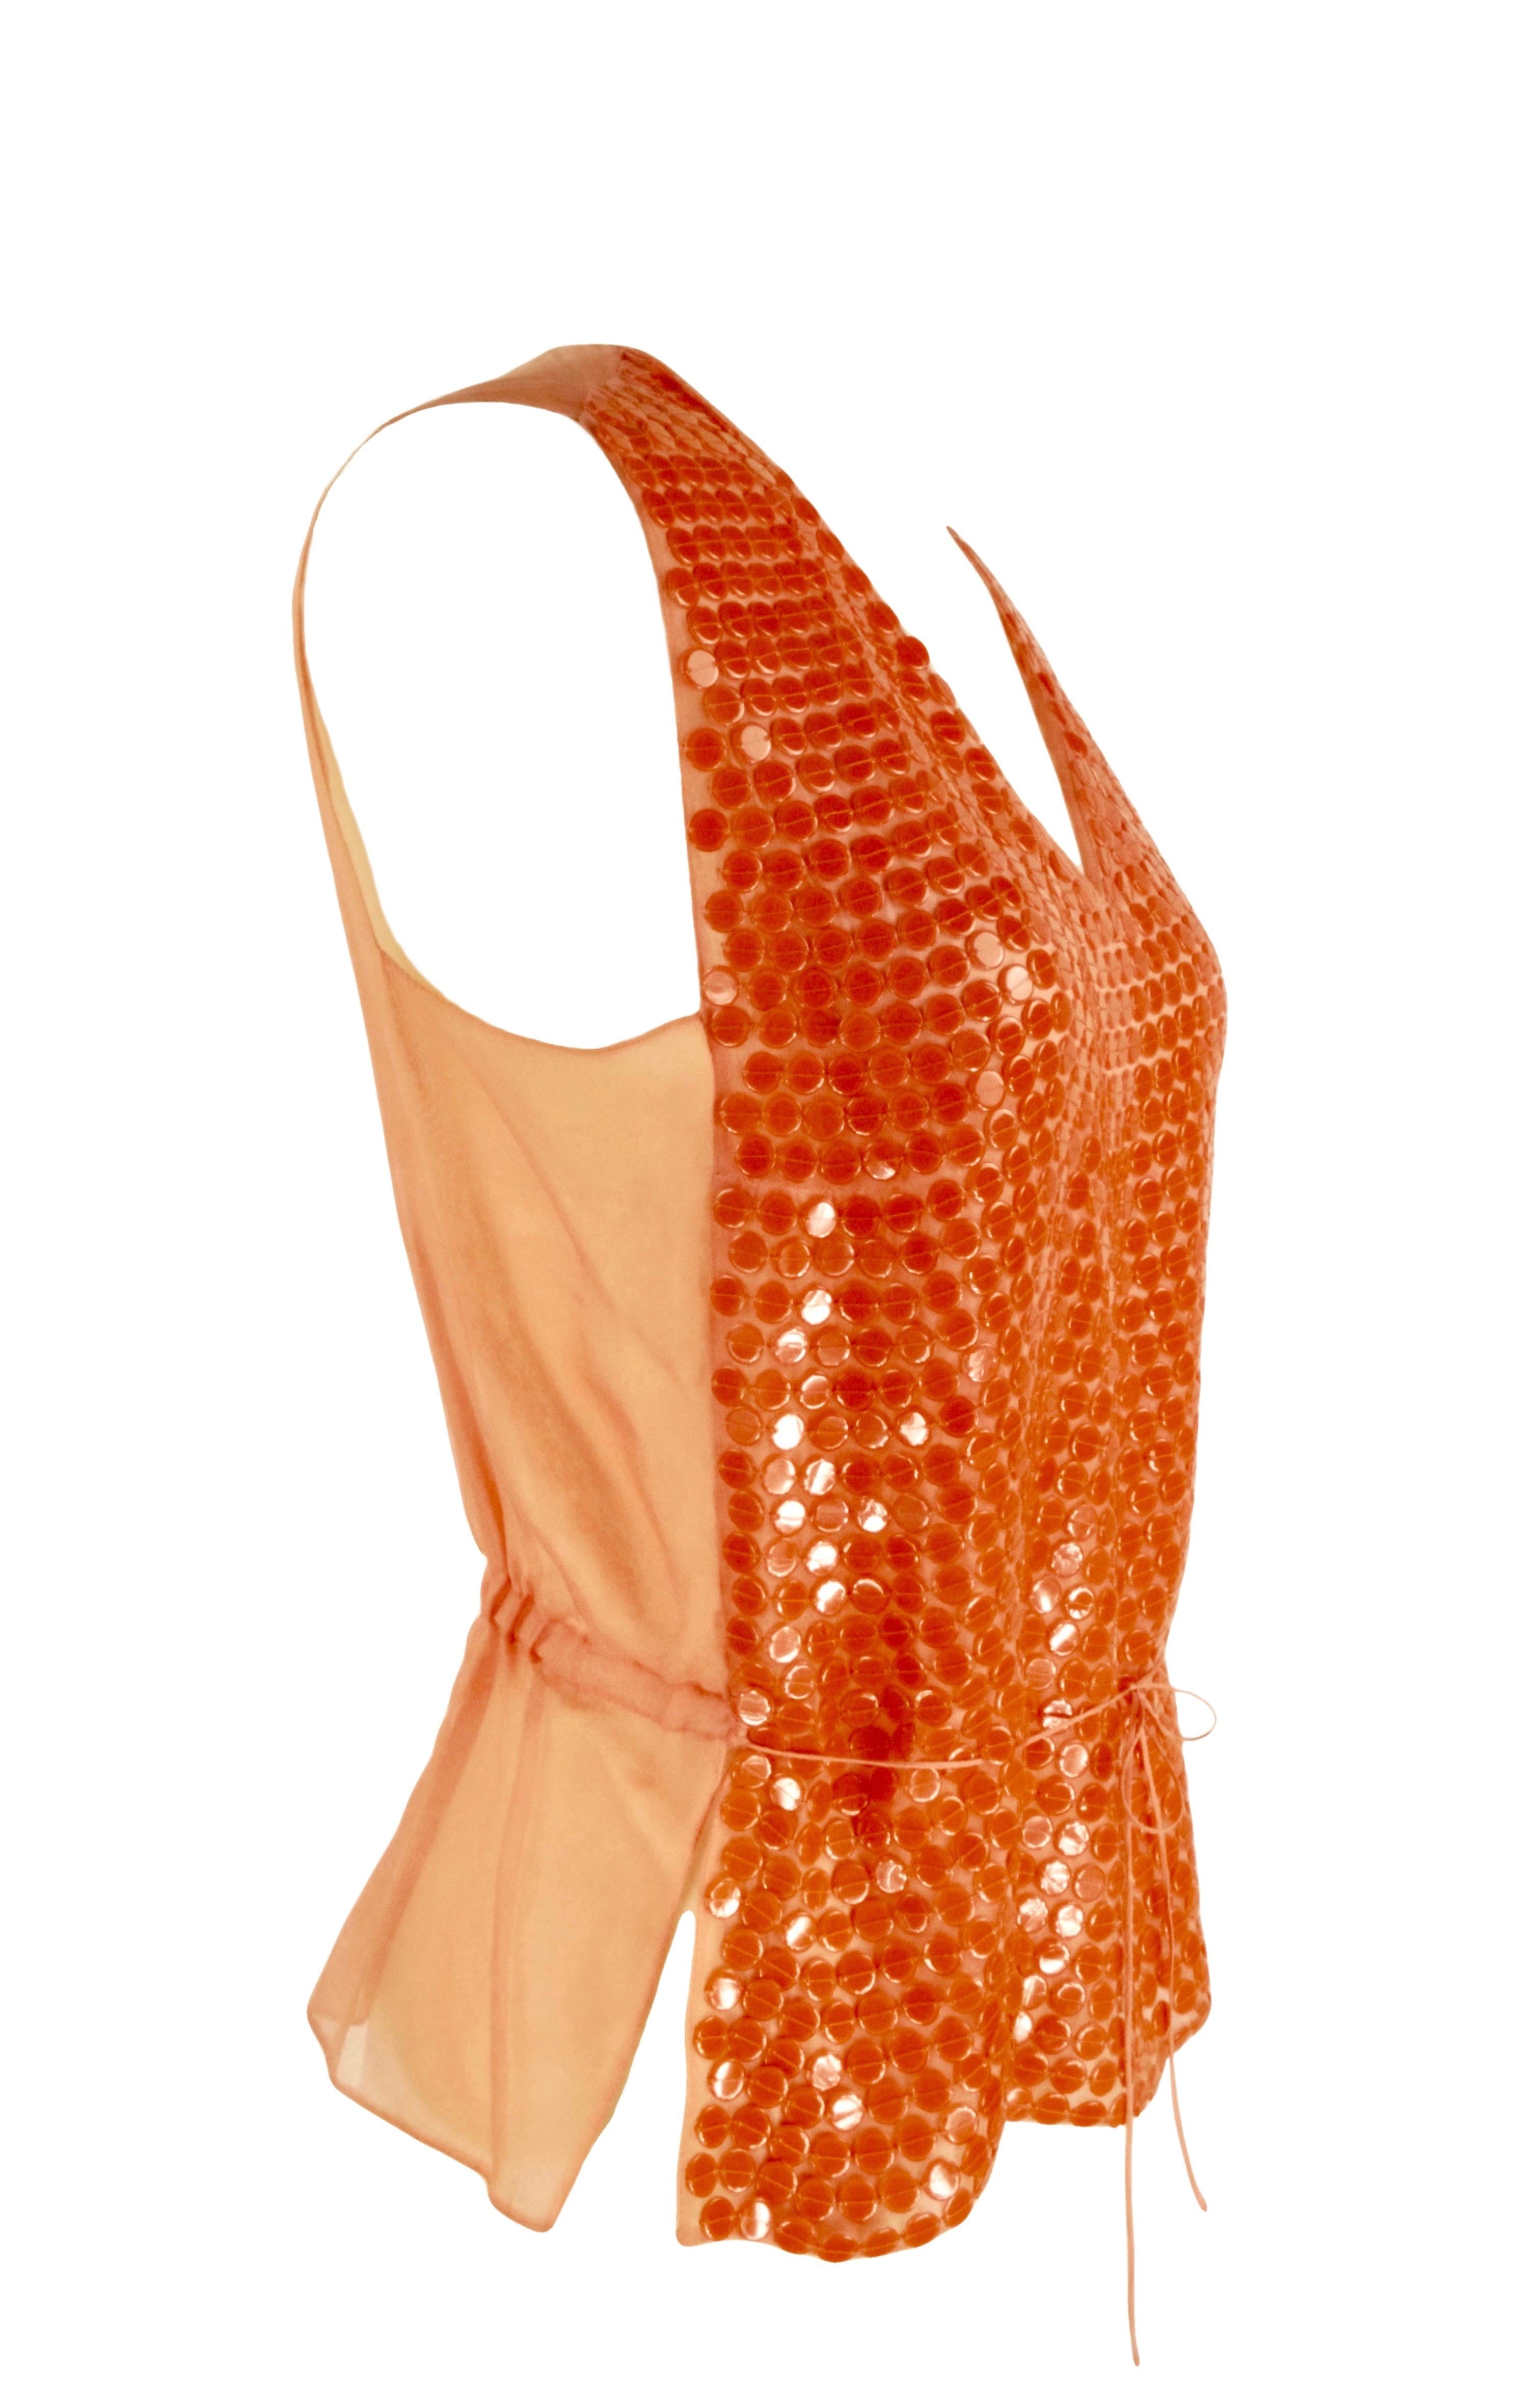 CHANEL Cruise 2000
Silk orange top
On the front giant sequins , on the back organza silk, thin silk belt
Size FR 42
Made in France
100% silk
Flat measures:
Length  cm. 56
Shoulders cm. 35
Bust cm. 46
Waist line cm. 39
